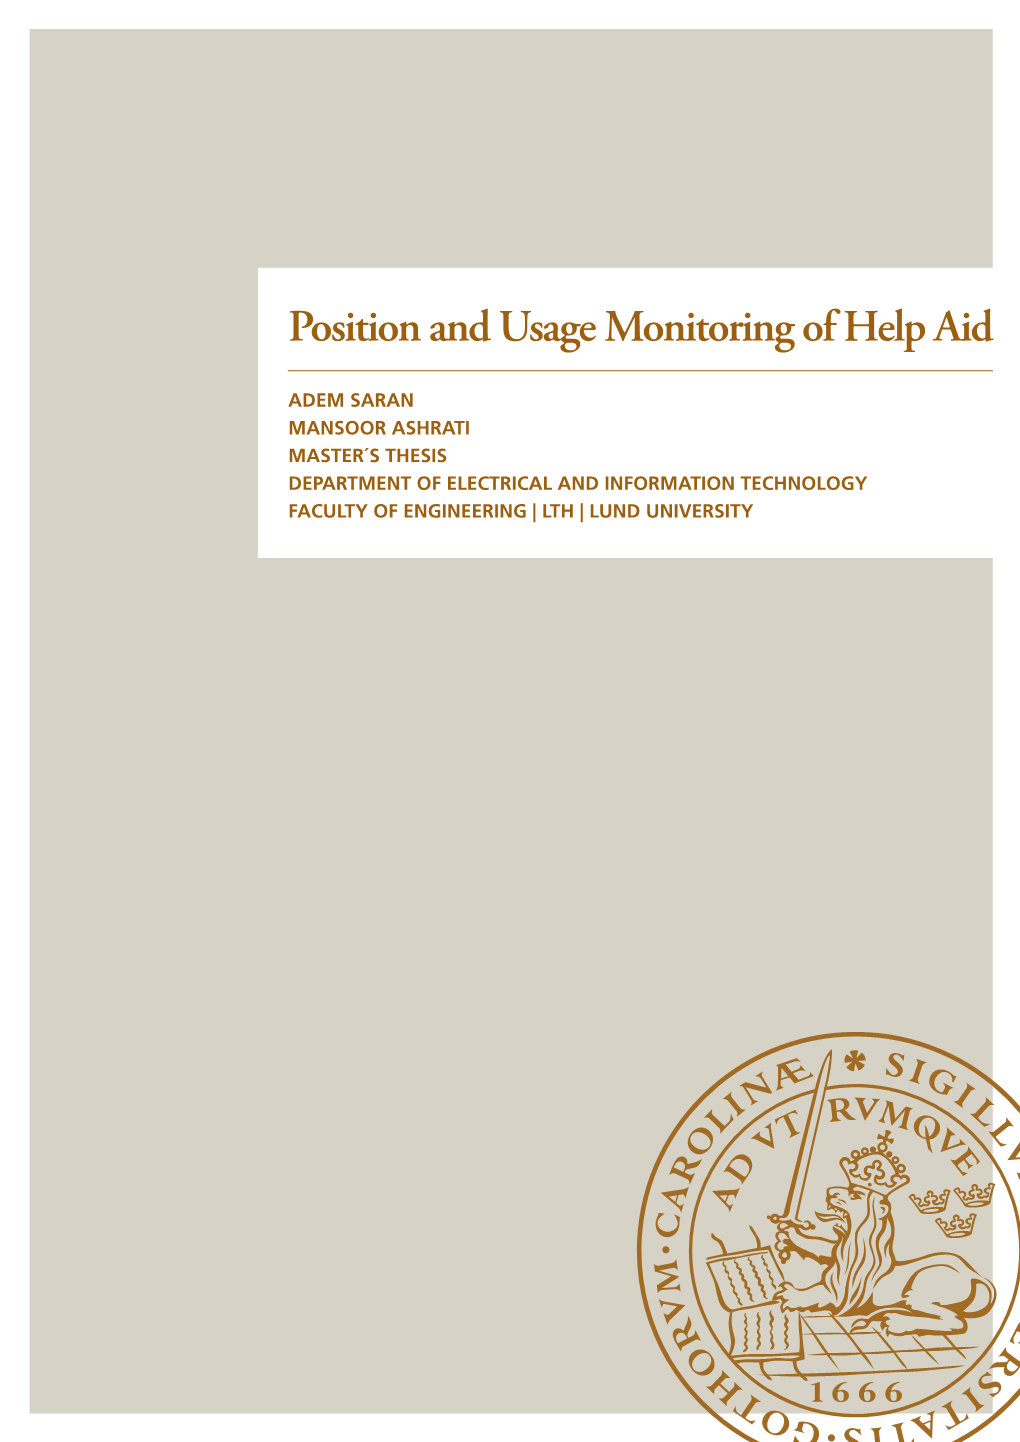 Position and Usage Monitoring of Help Aid